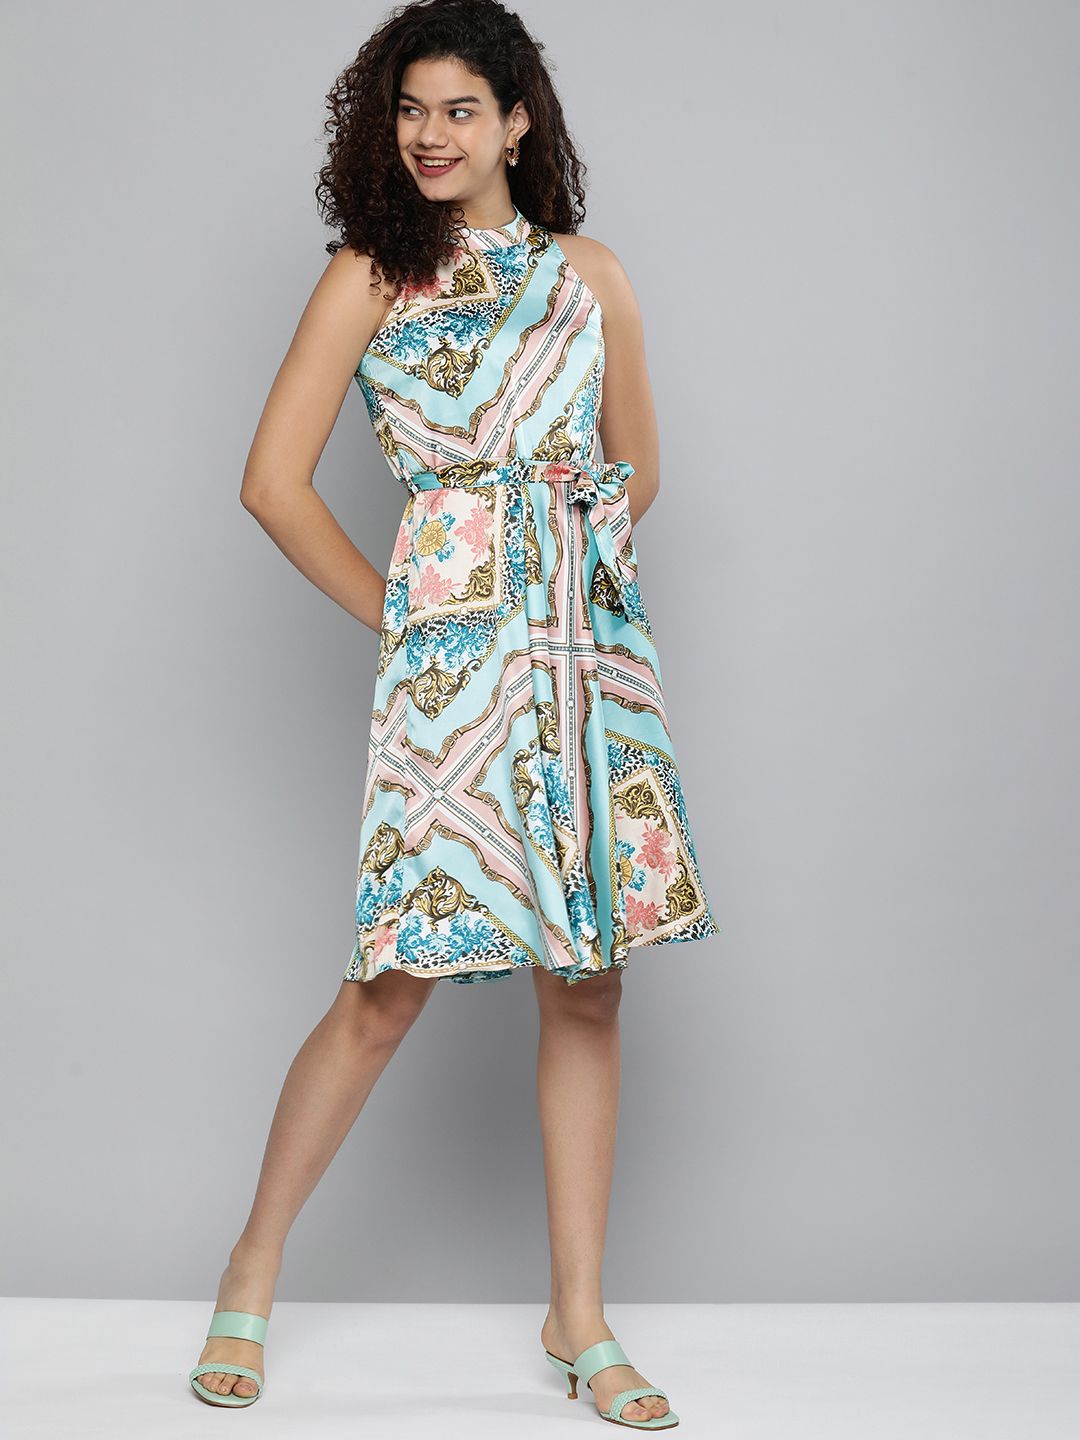 Kvsfab Blue & Pink Printed Satin Finish A-Line Dress with Belt Price in India